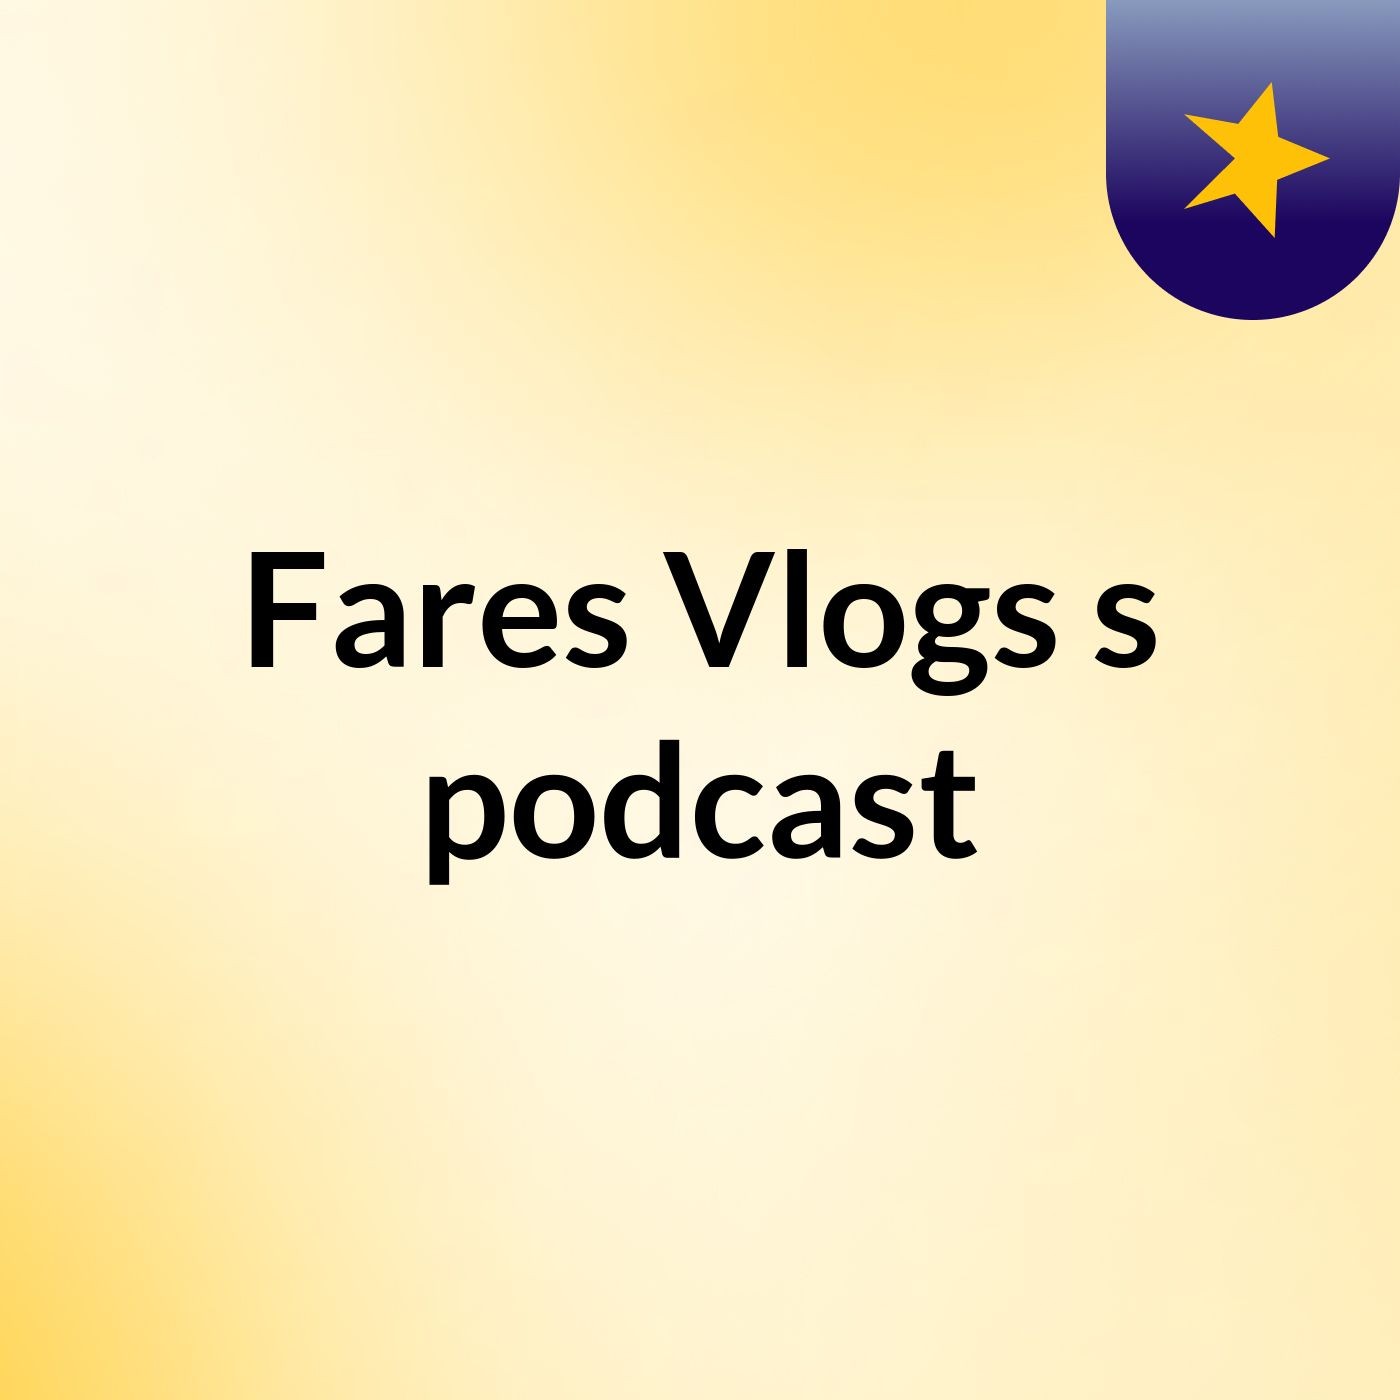 Episode 3 - Fares Vlogs's podcast